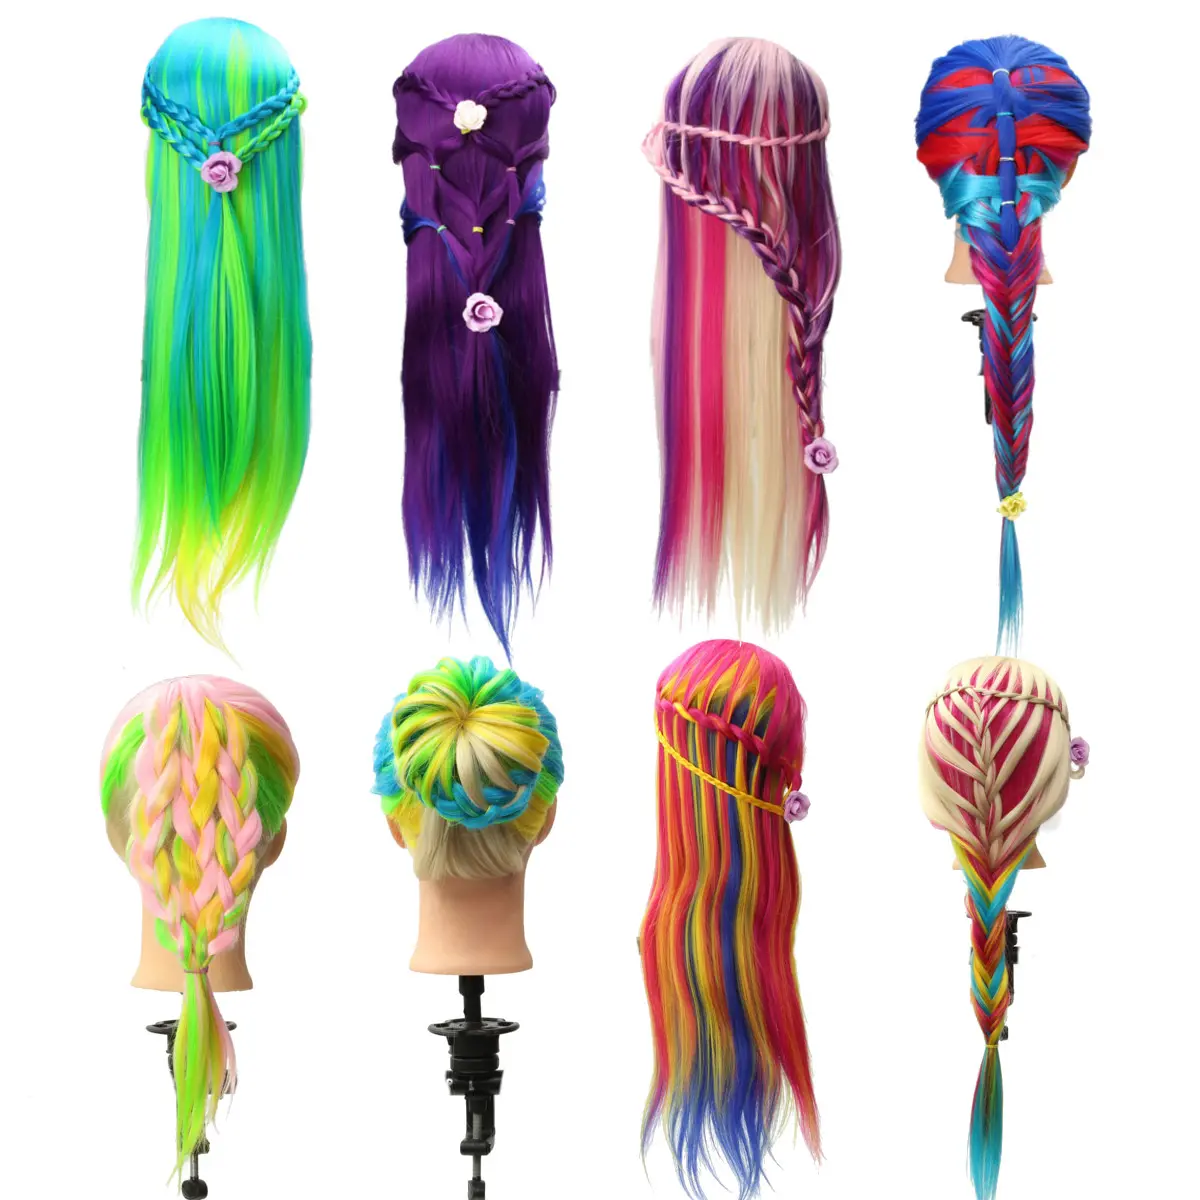 8 Colors Salon Hairdressing Braiding Practice Mannequin Hair Training Head Models With Clamp Holder 